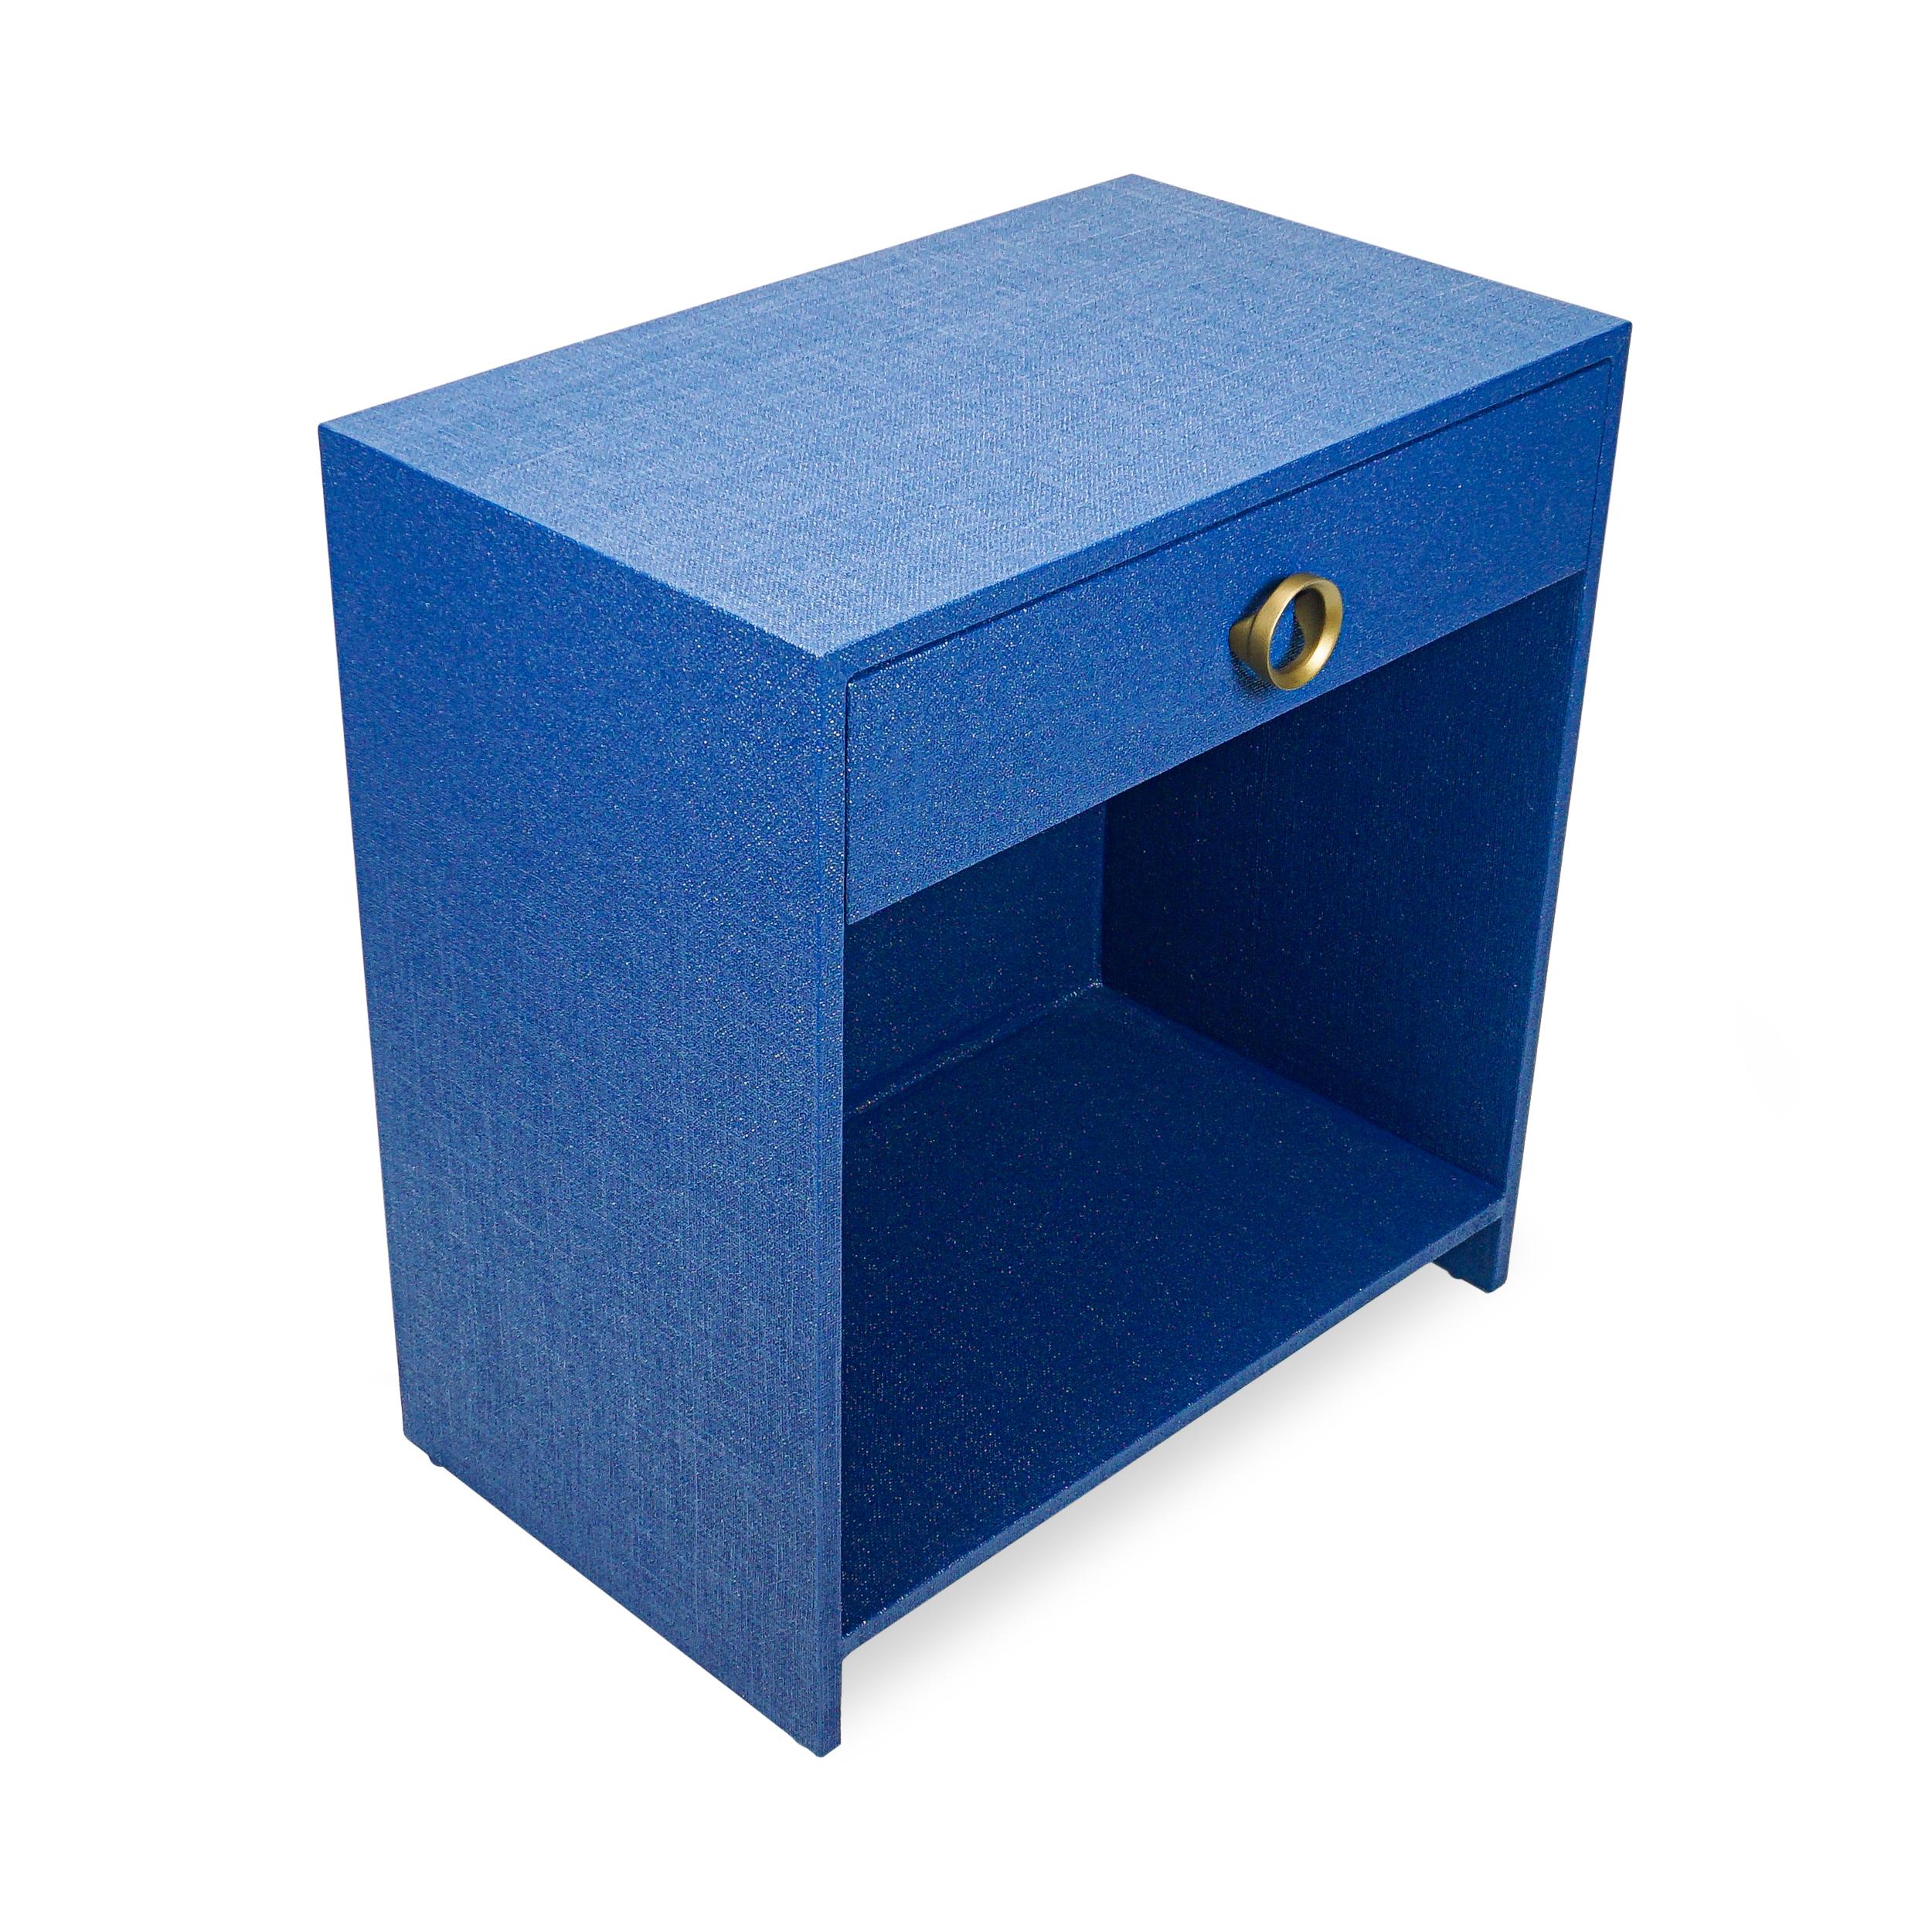 Burlap-wrapped side table lacquered in your custom color. Shown with drawer and cubby. Frame made of solid hardwood. Slow-close drawer. Drawer pull is round and gold-painted. Ask us about wire cutouts and integrated charging station set-up. Also